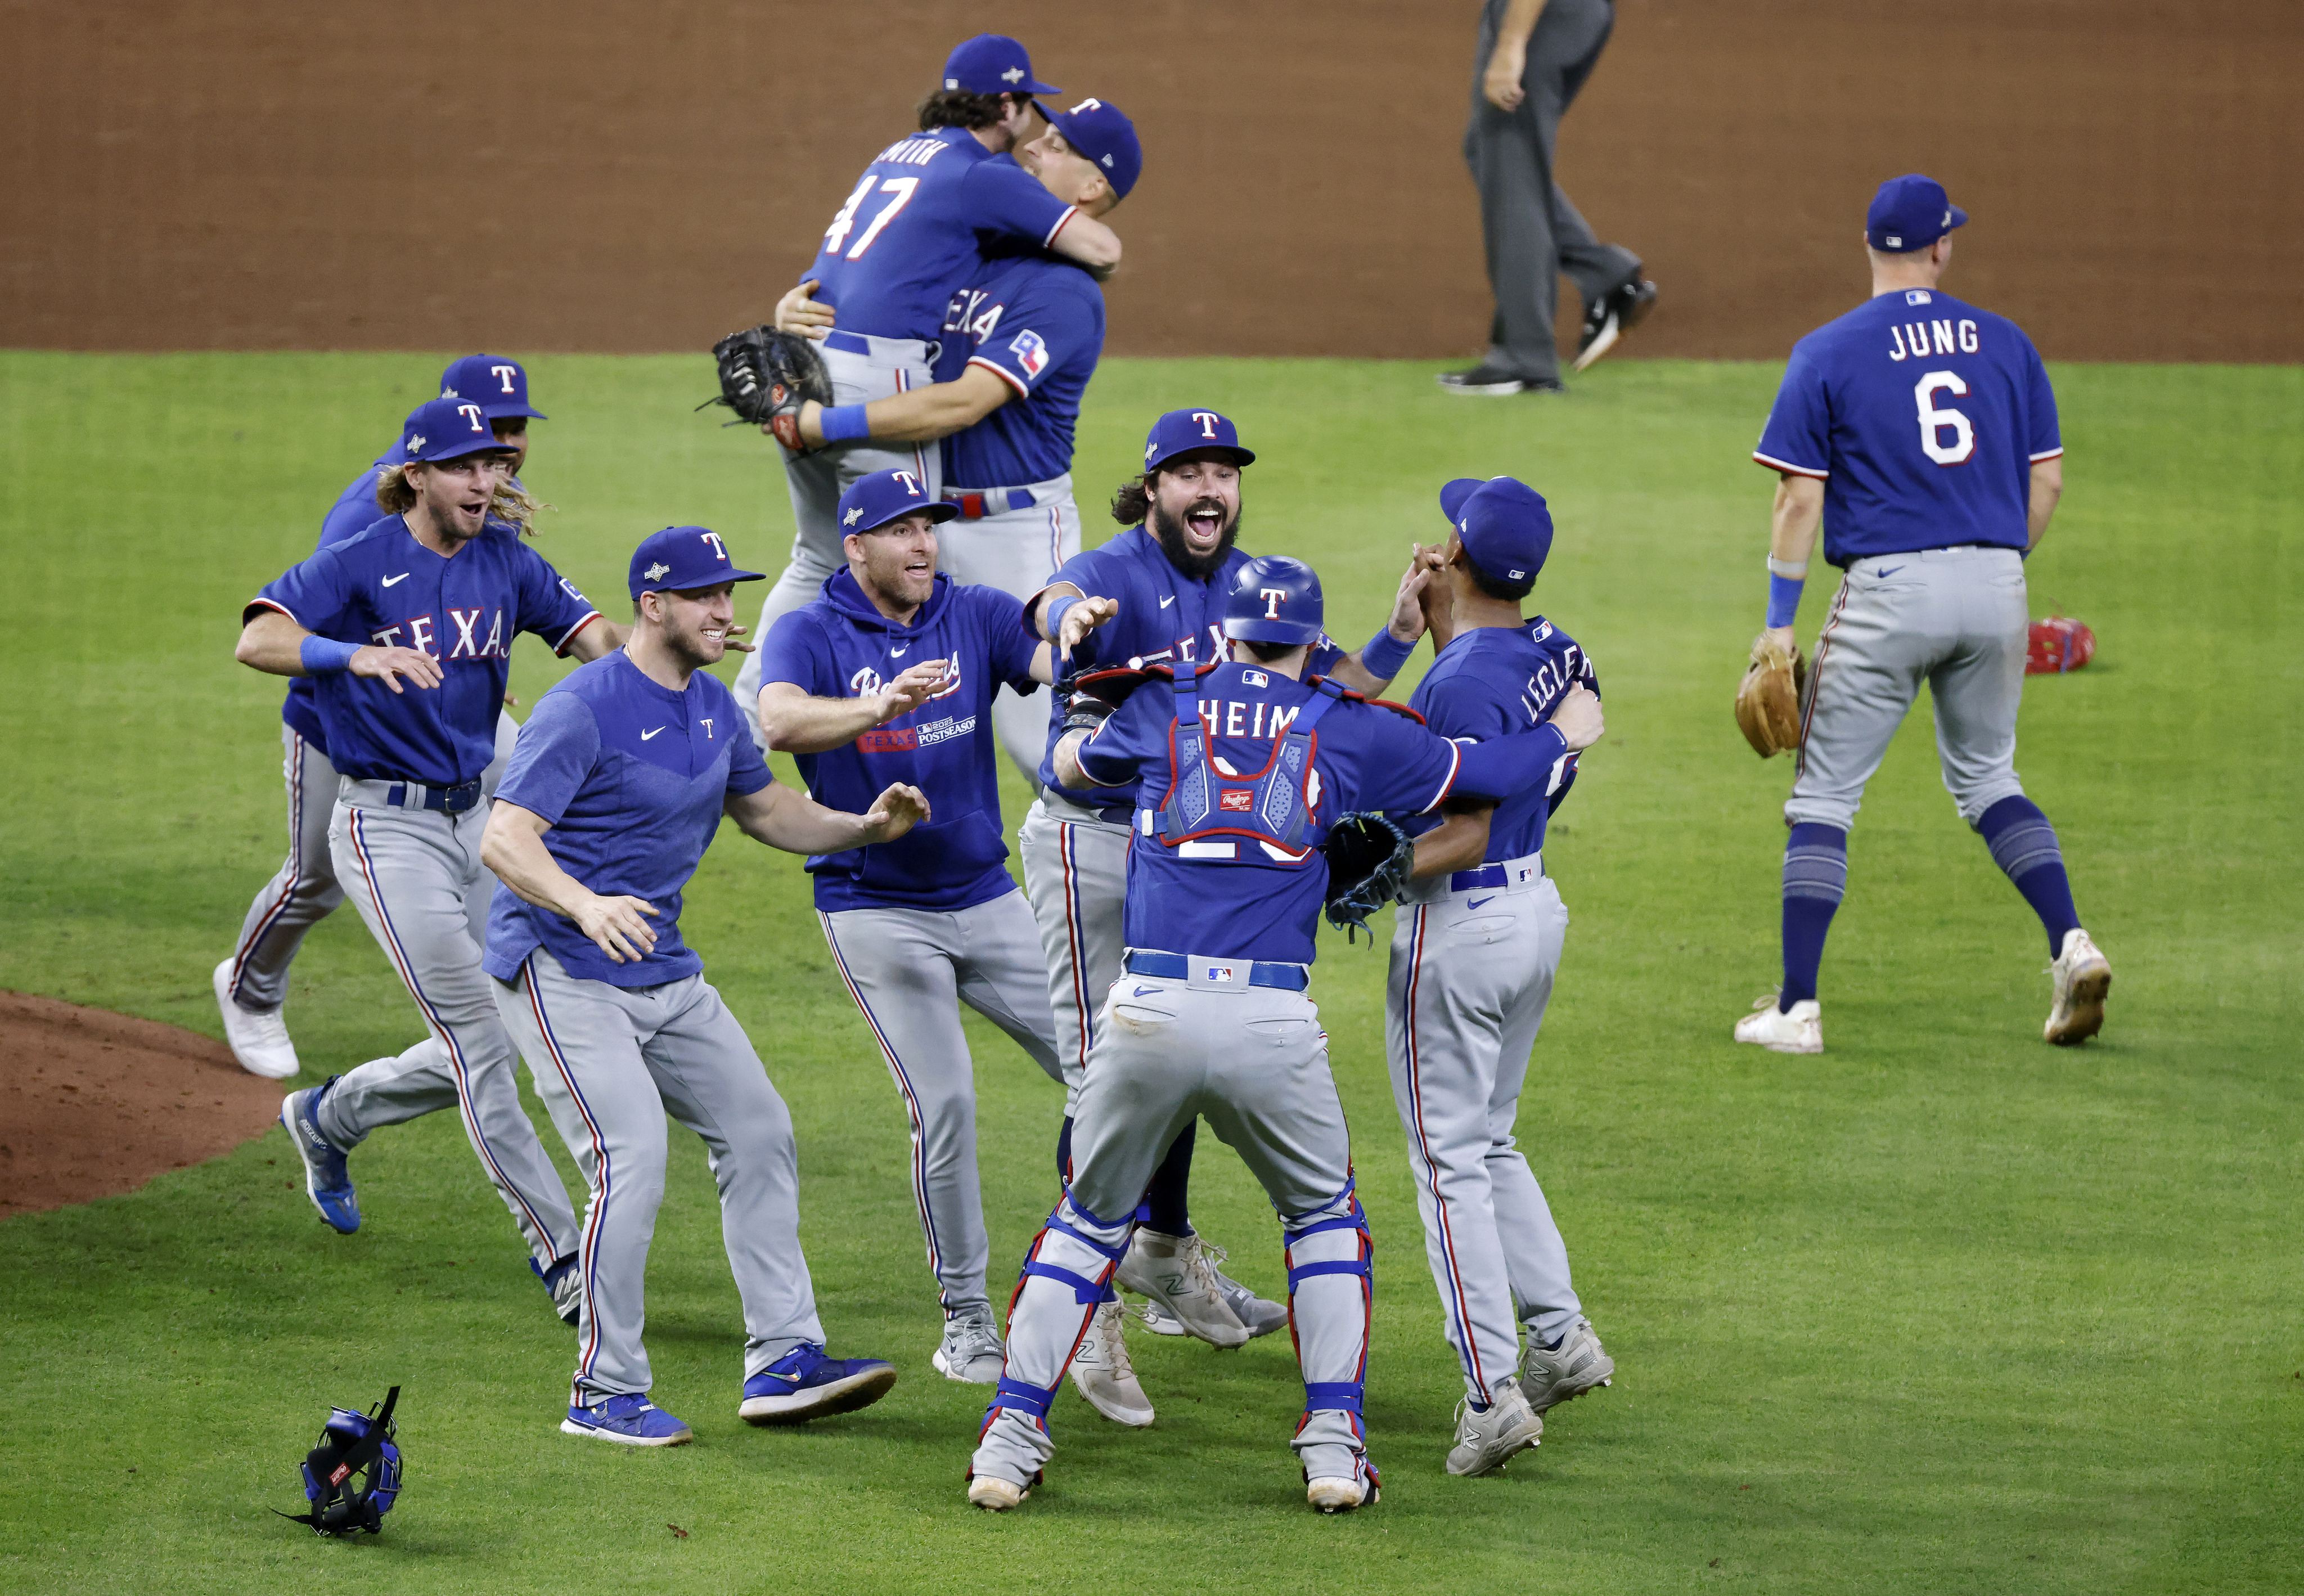 These resilient Rangers can go no higher. For first time, they are World  Series champions